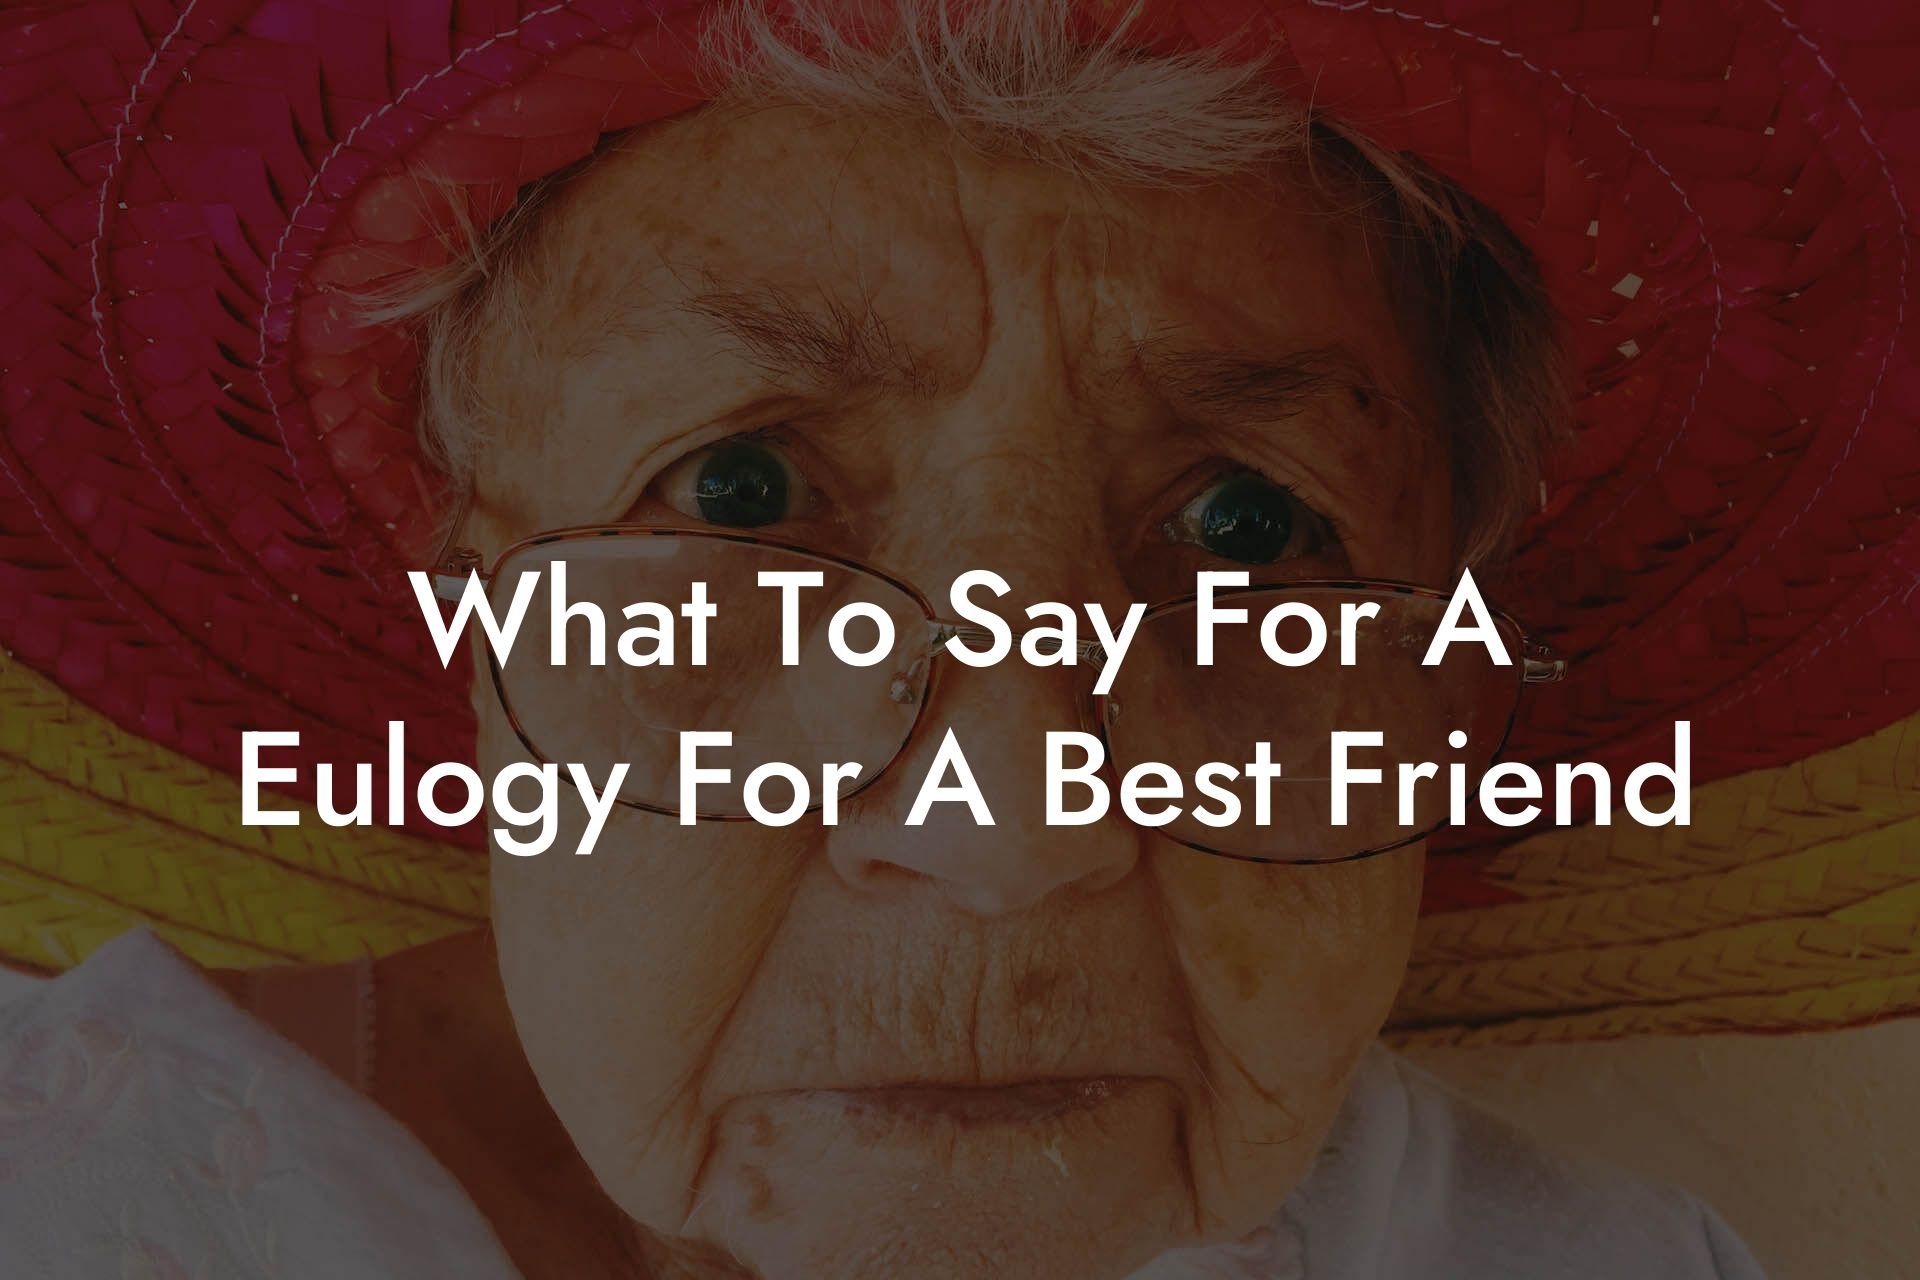 What To Say For A Eulogy For A Best Friend